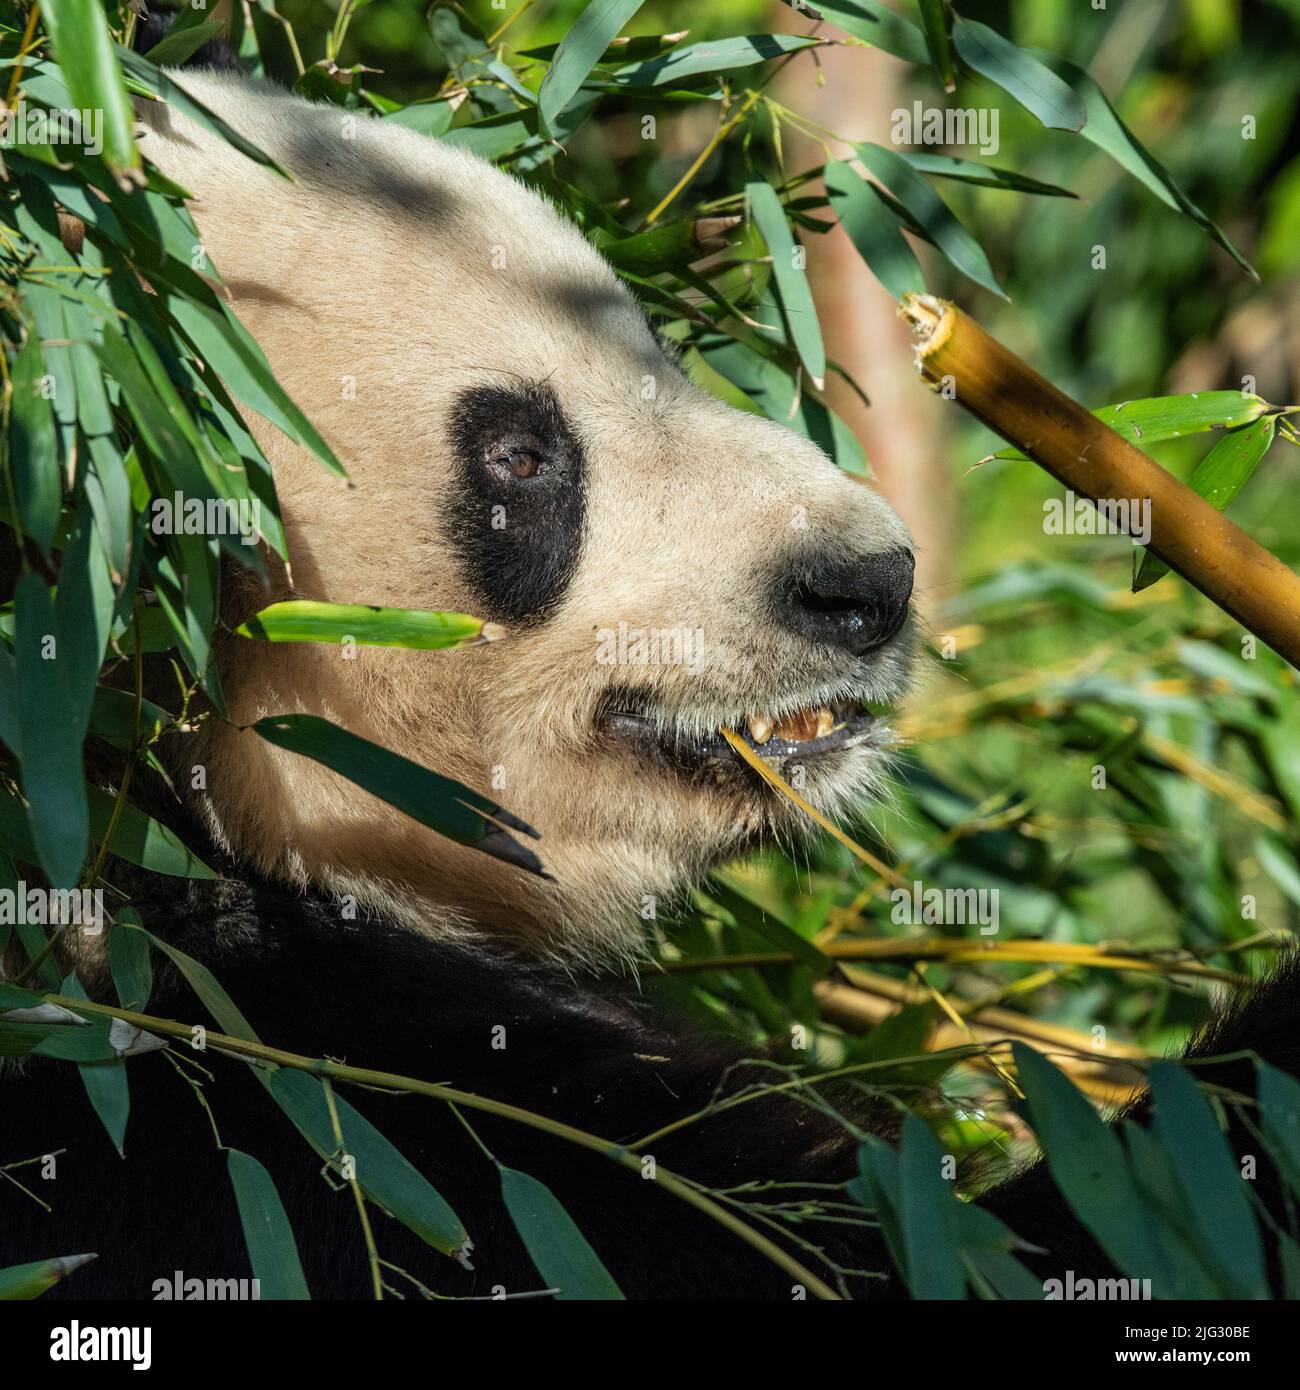 A Giant Panda sitting down eating shots of bamboo. In the wild they consume 10-15Kgs per day of bamboo Stock Photo